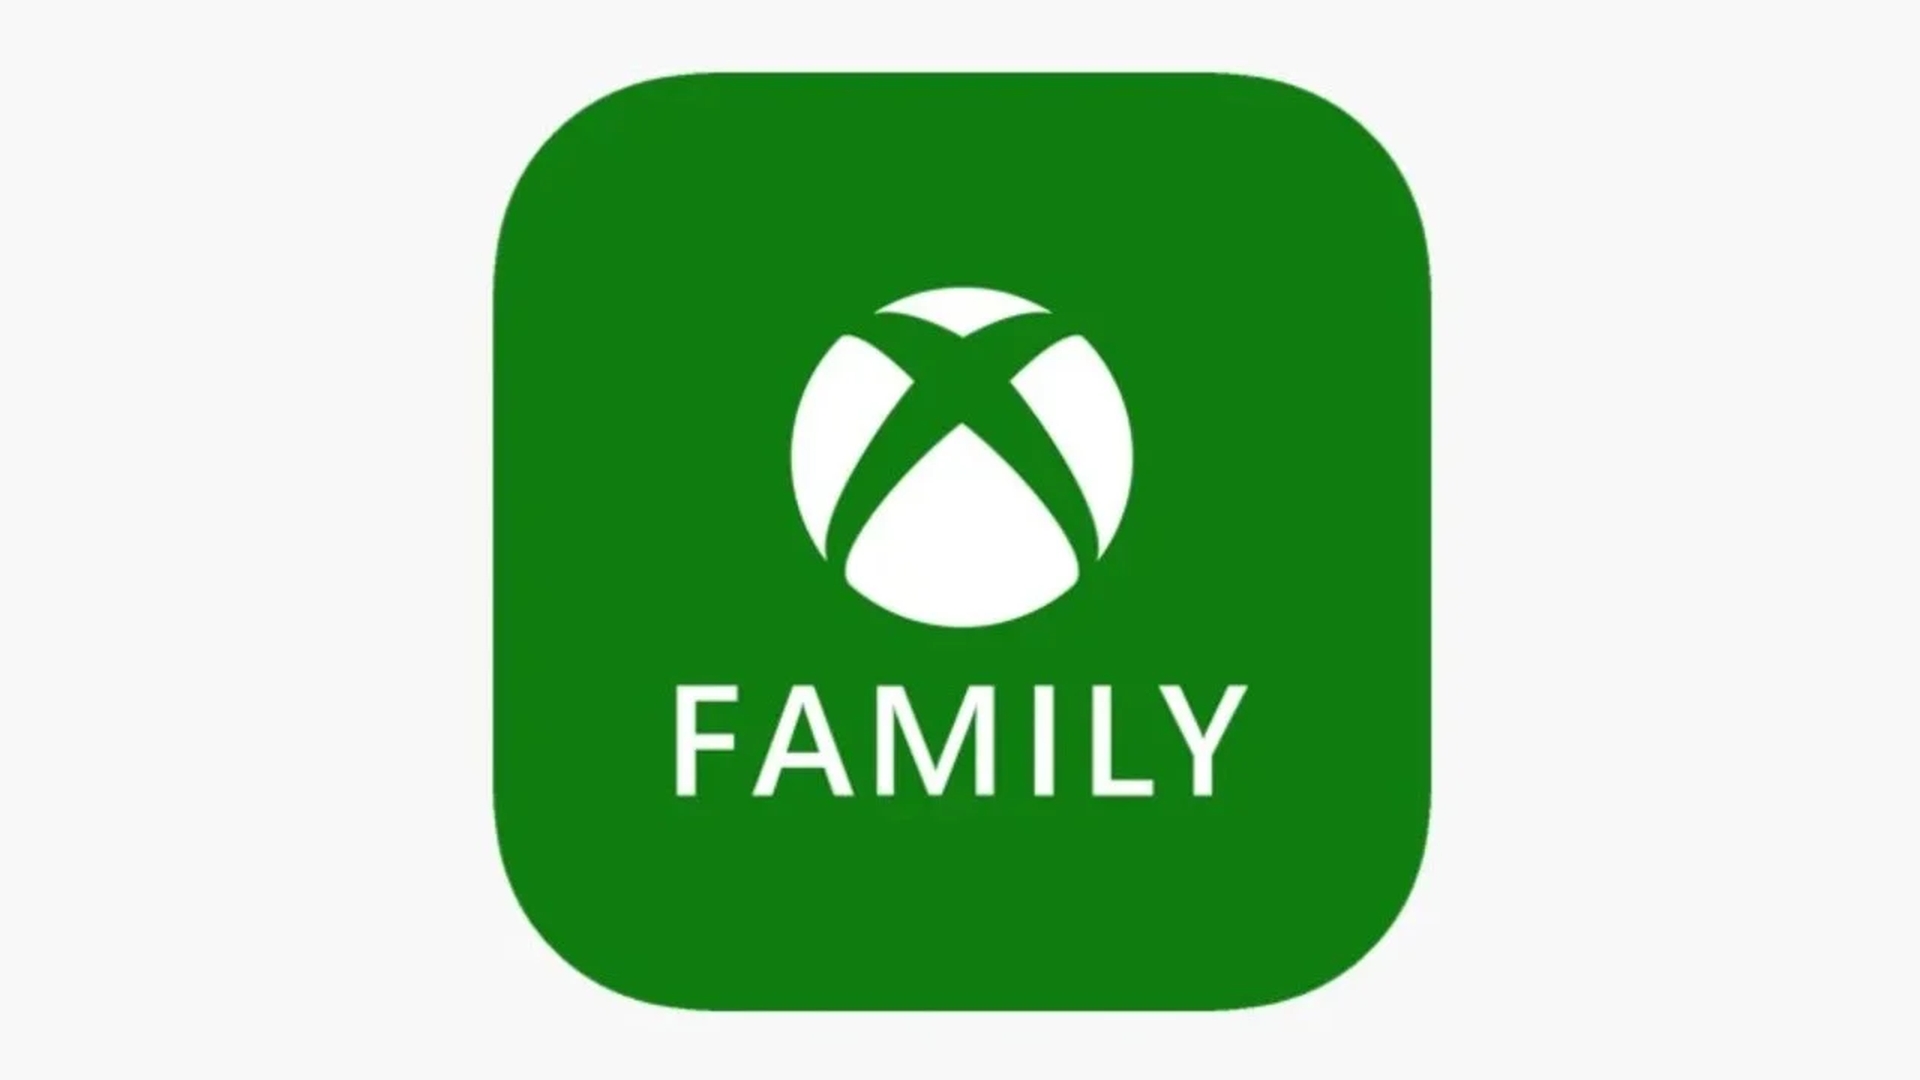 Today, we are going to be covering the Xbox Game Pass family plan, which is currently being tested by Microsoft and will make it easier to share subscriptions.